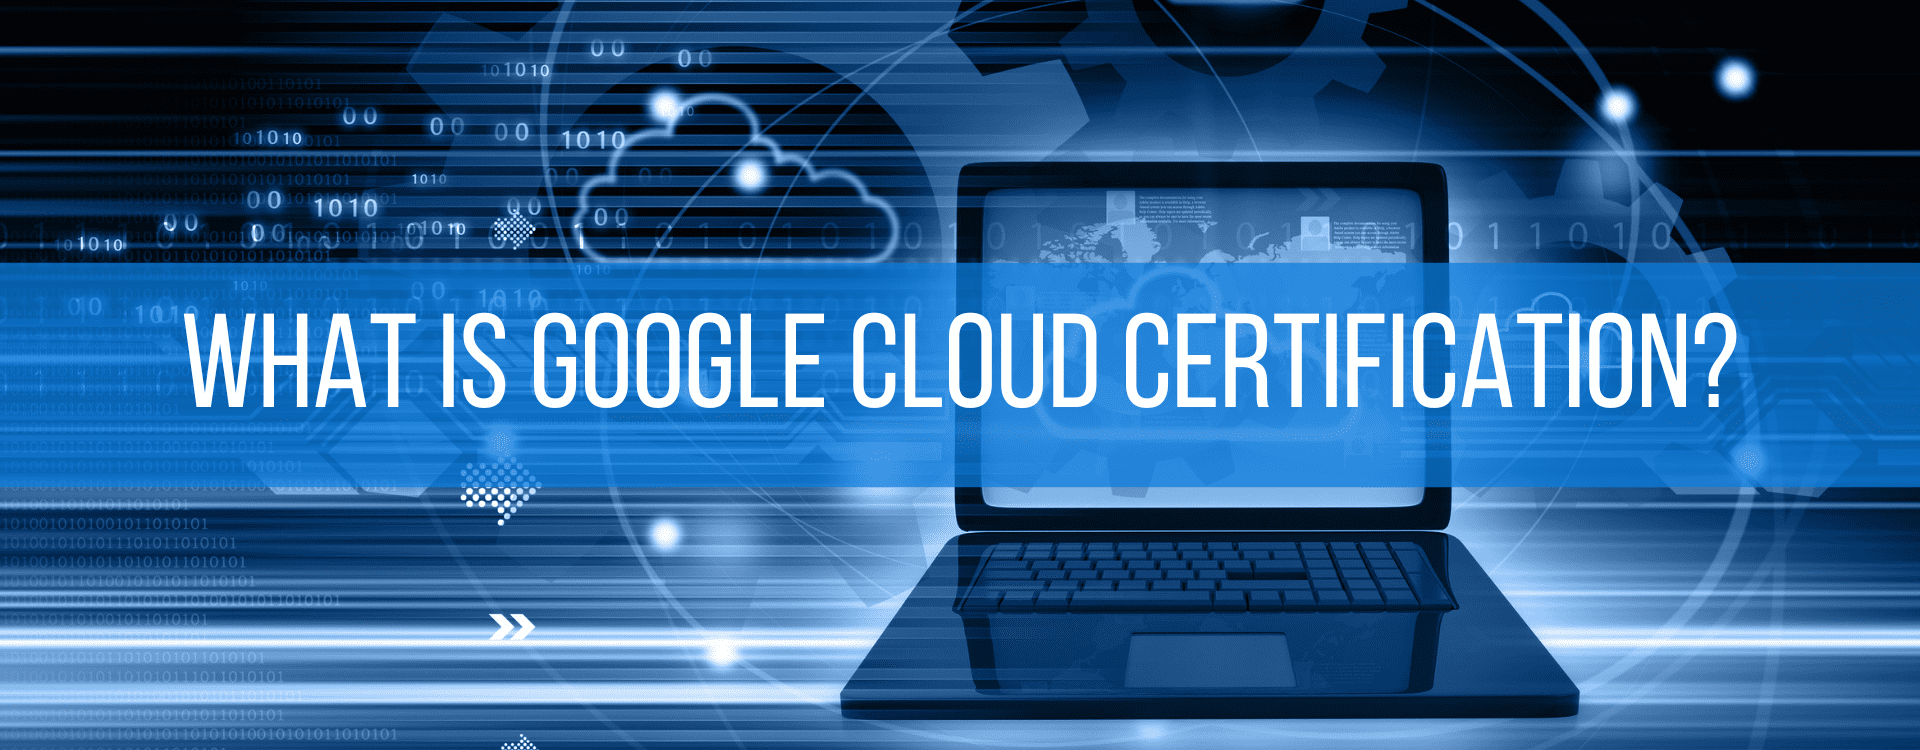 WHAT IS GOOGLE CLOUD CERTIFICATION